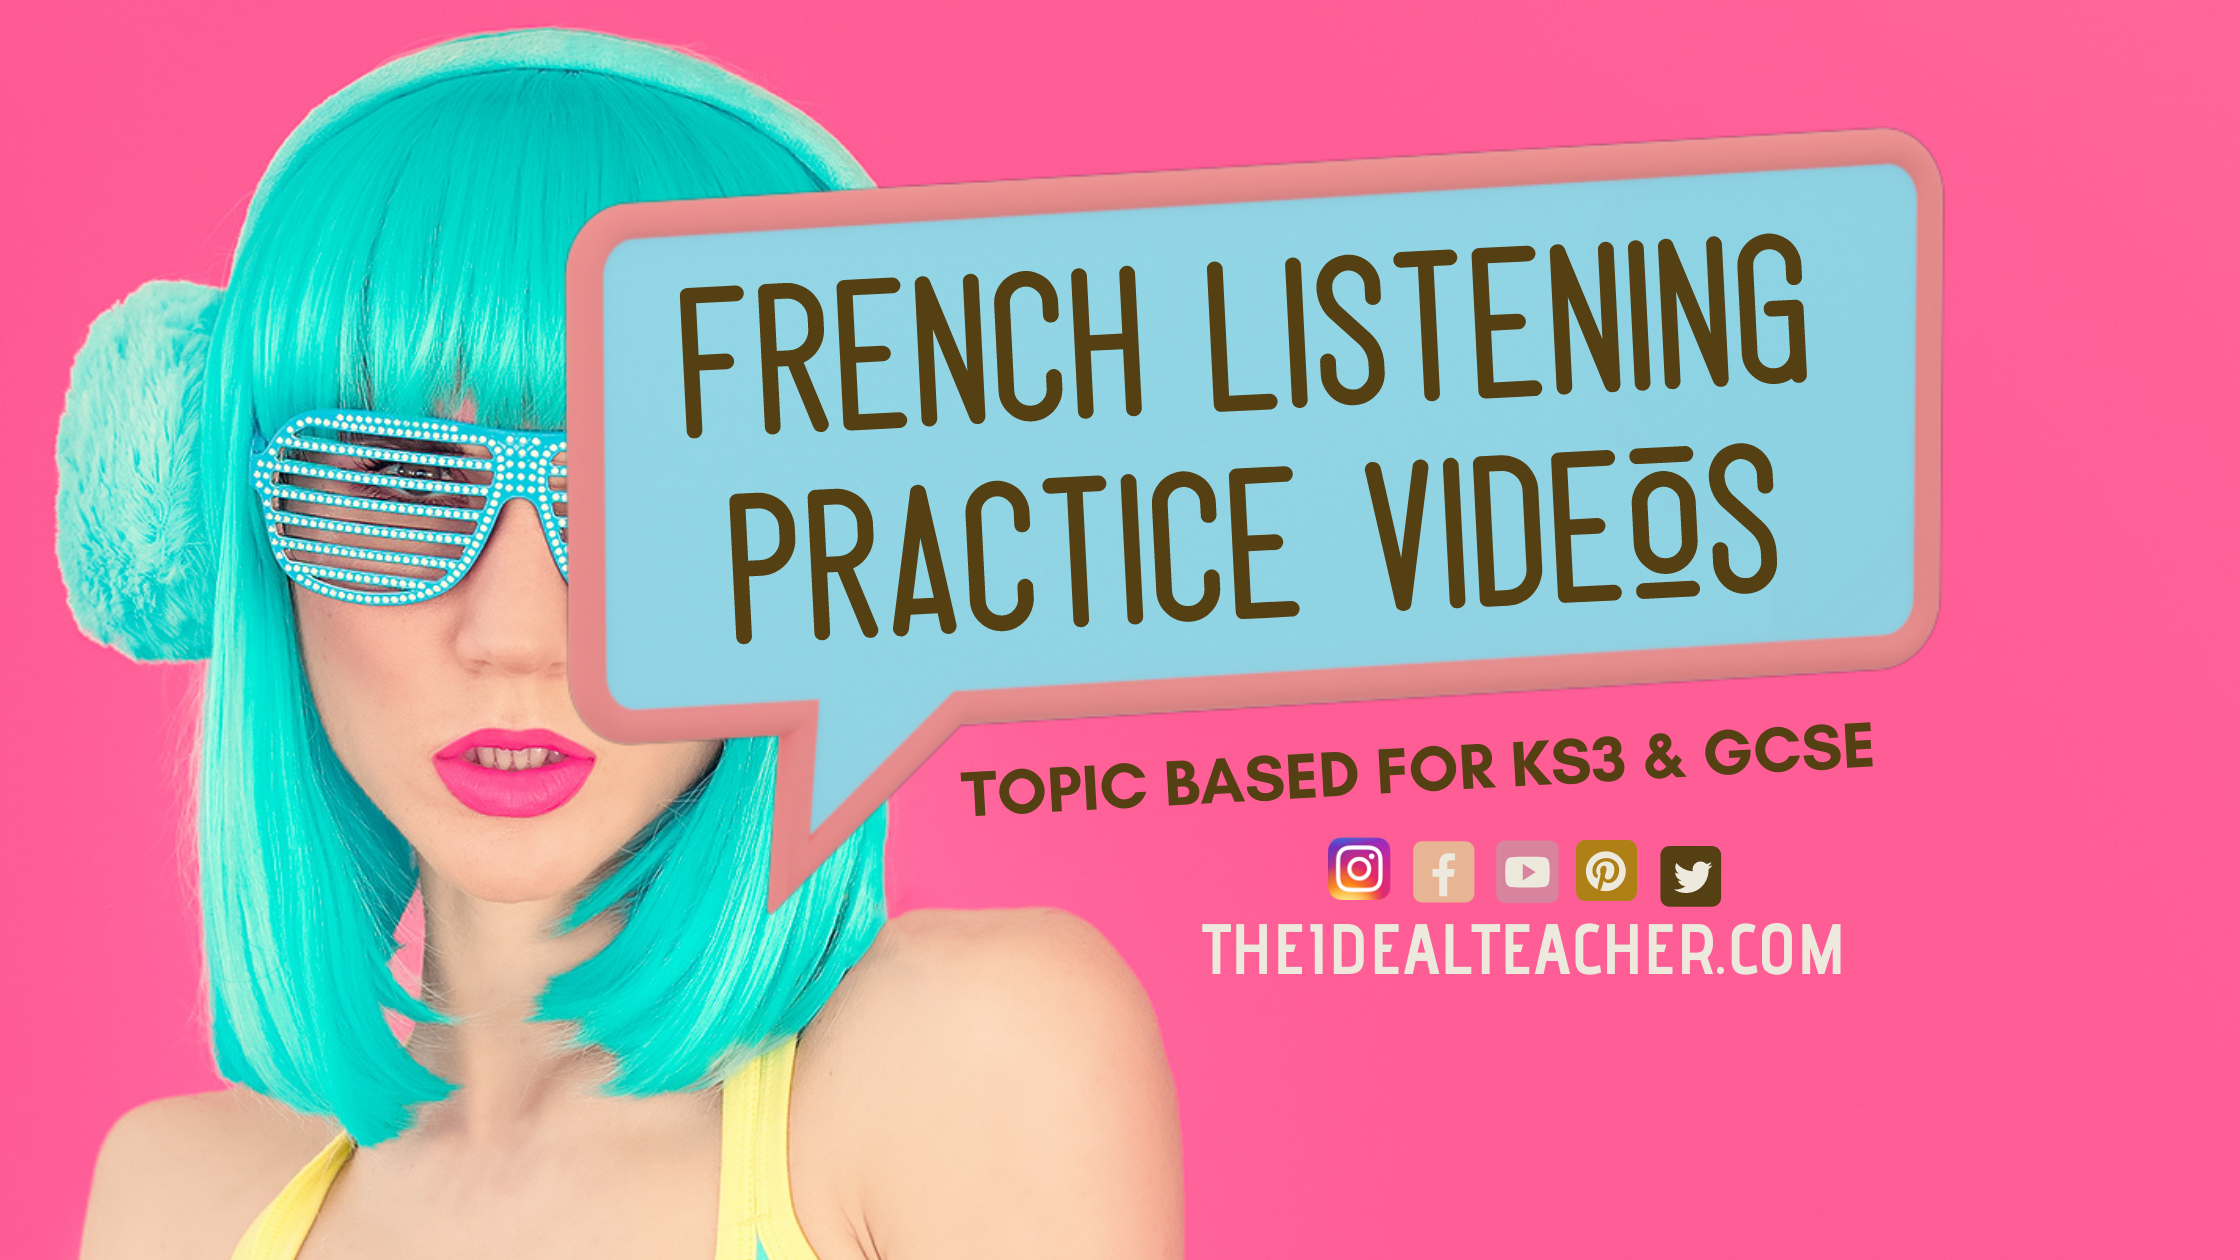 15 Free GCSE French Videos for Listening Practice by Topic